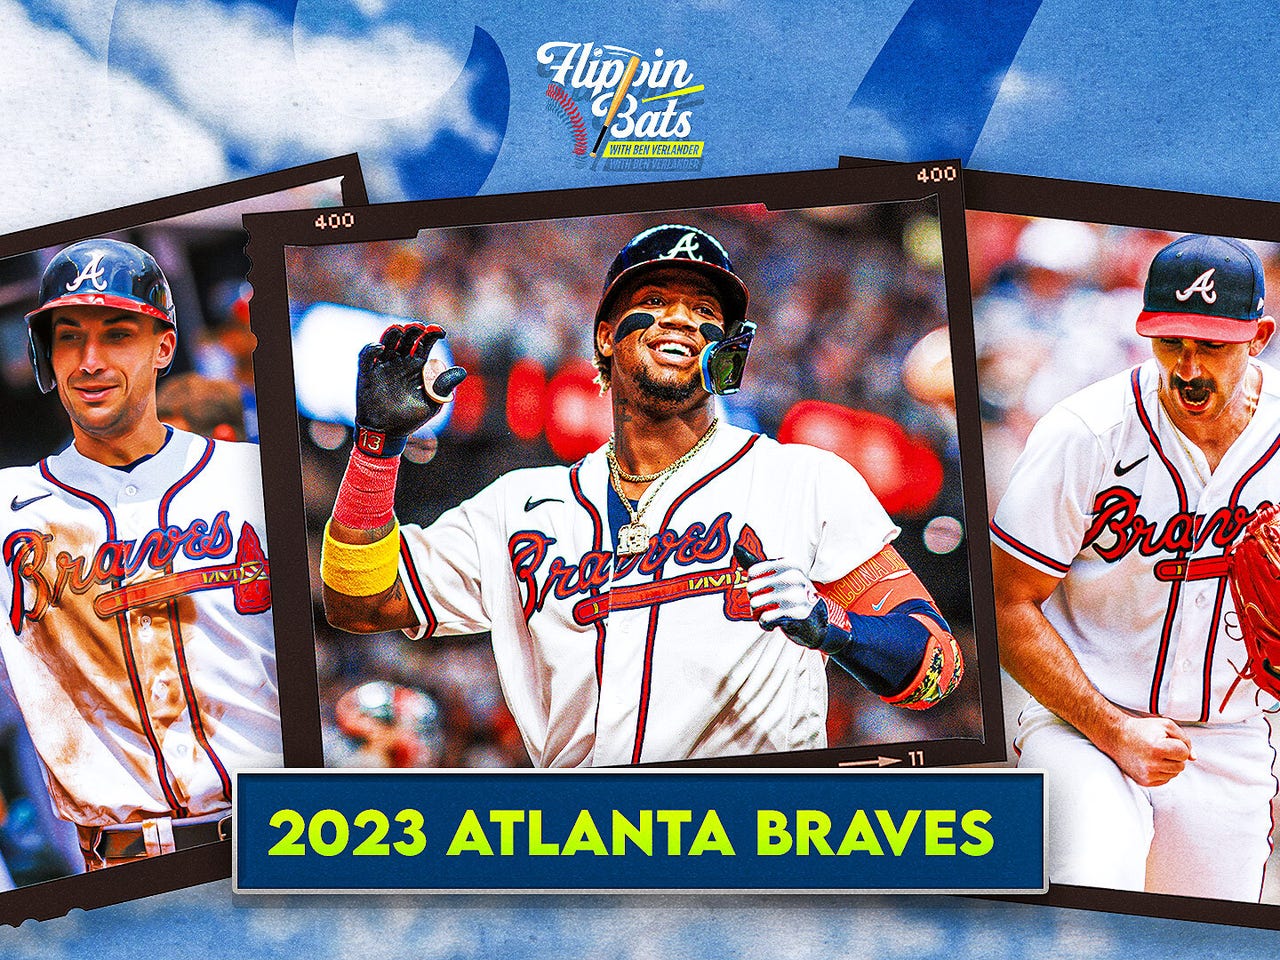 3 reasons why Braves will win 2023 World Series